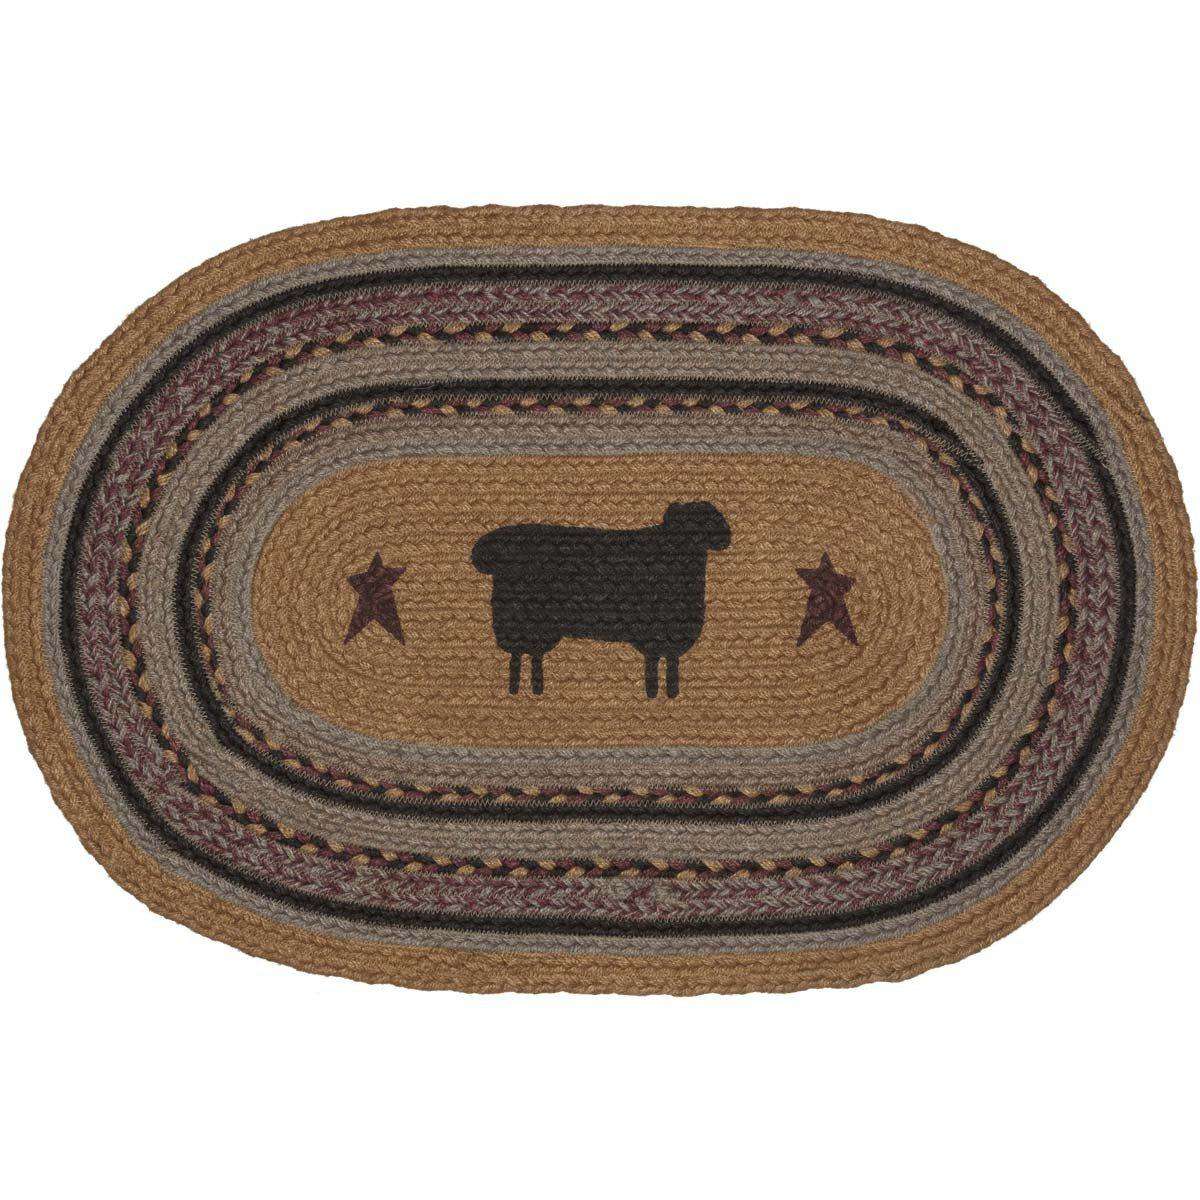 Heritage Farms Sheep Jute Braided Rug Oval/Half Circle rugs VHC Brands 20x30 inch Oval 